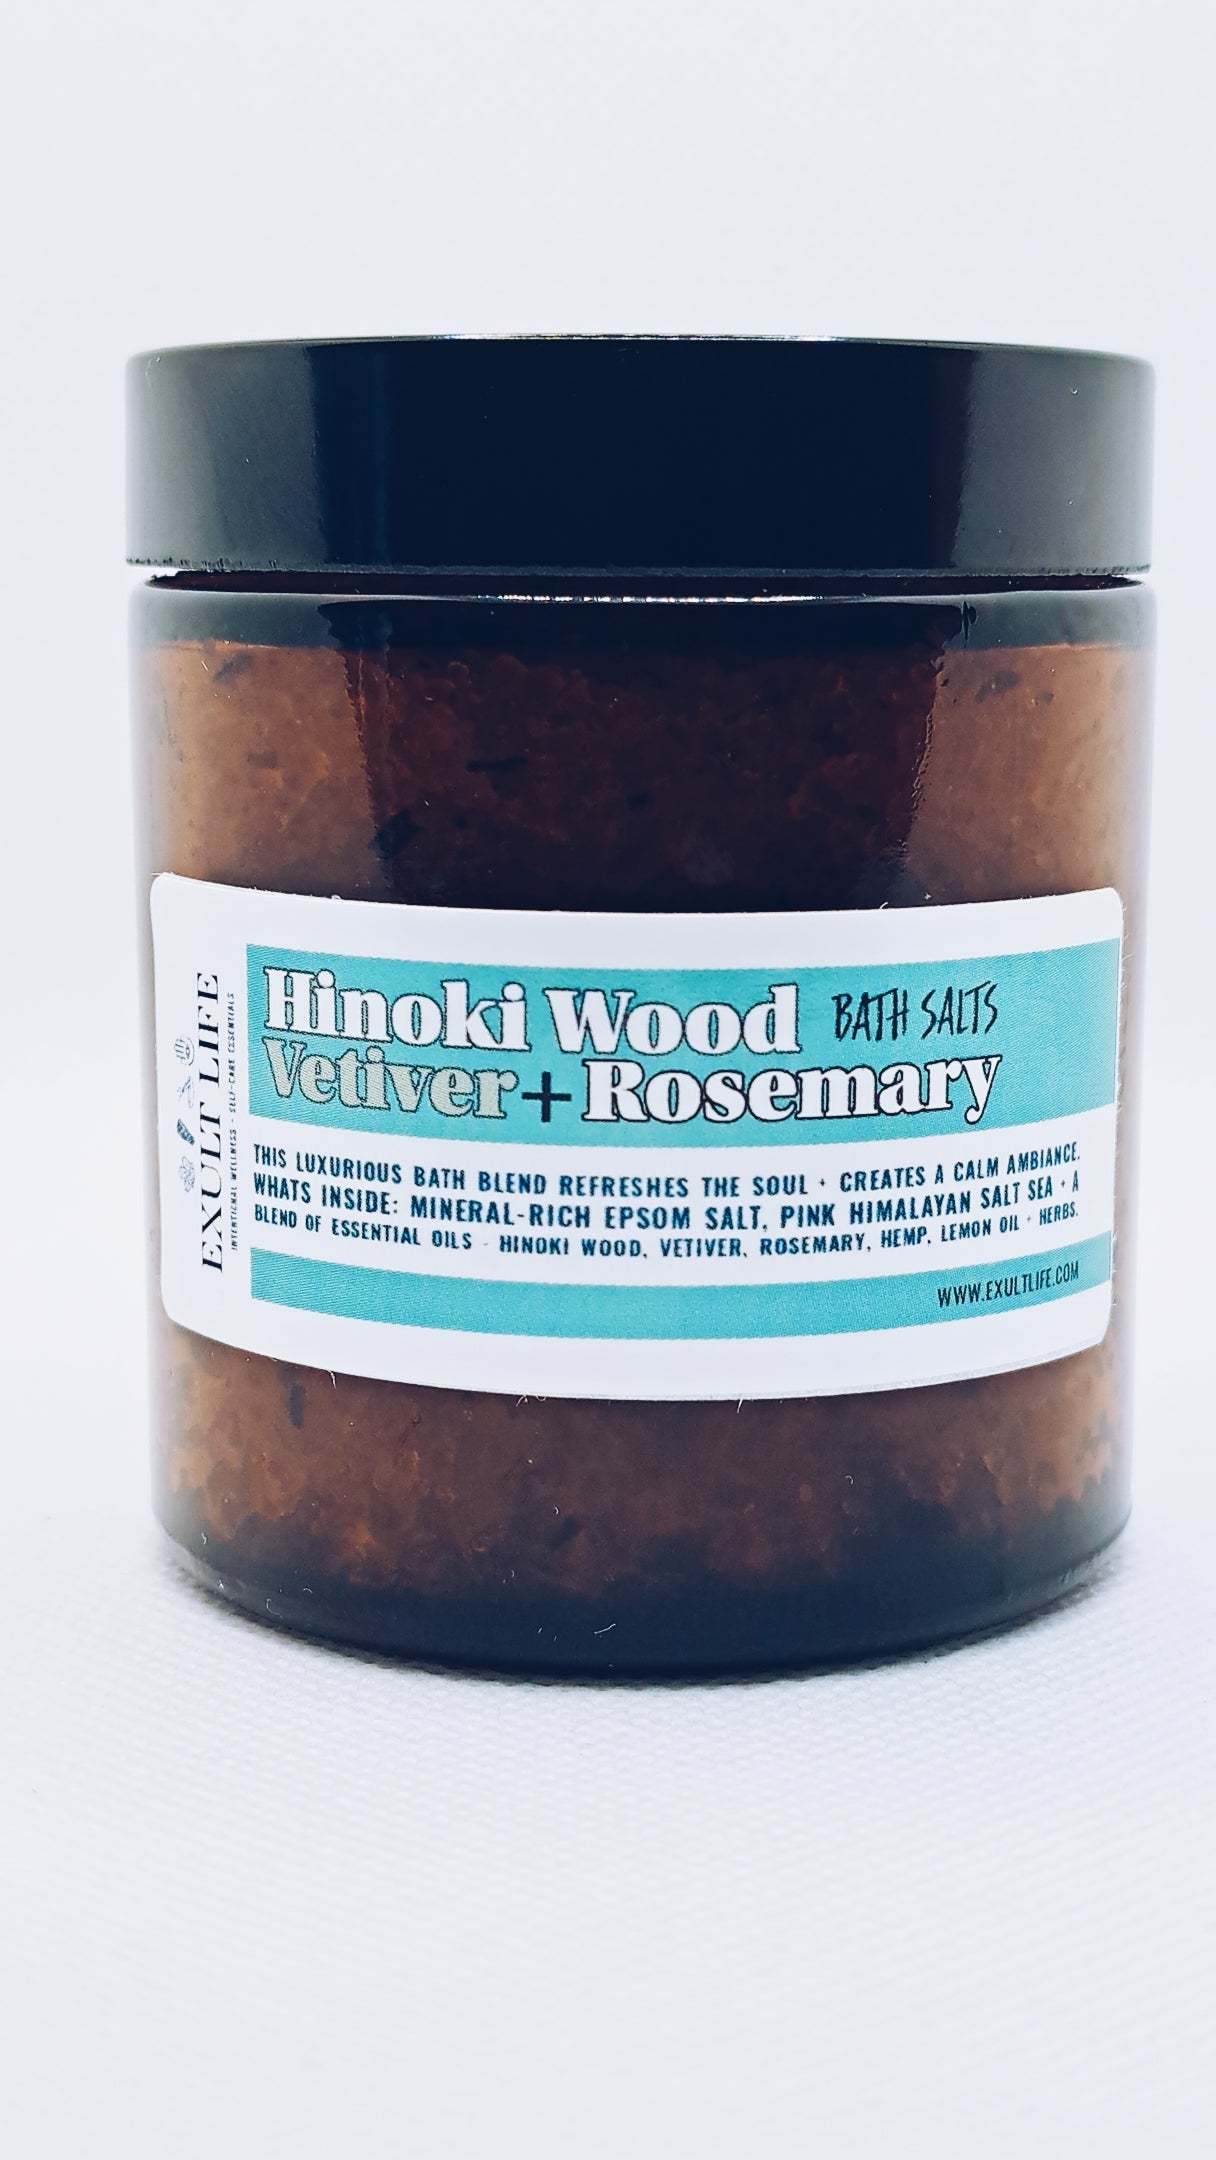 Enjoy the feeling of being bathed with the energy of the forest with this 4 ounce jar of Hinoki Wood, Vetiver and Rosemary bath salt.